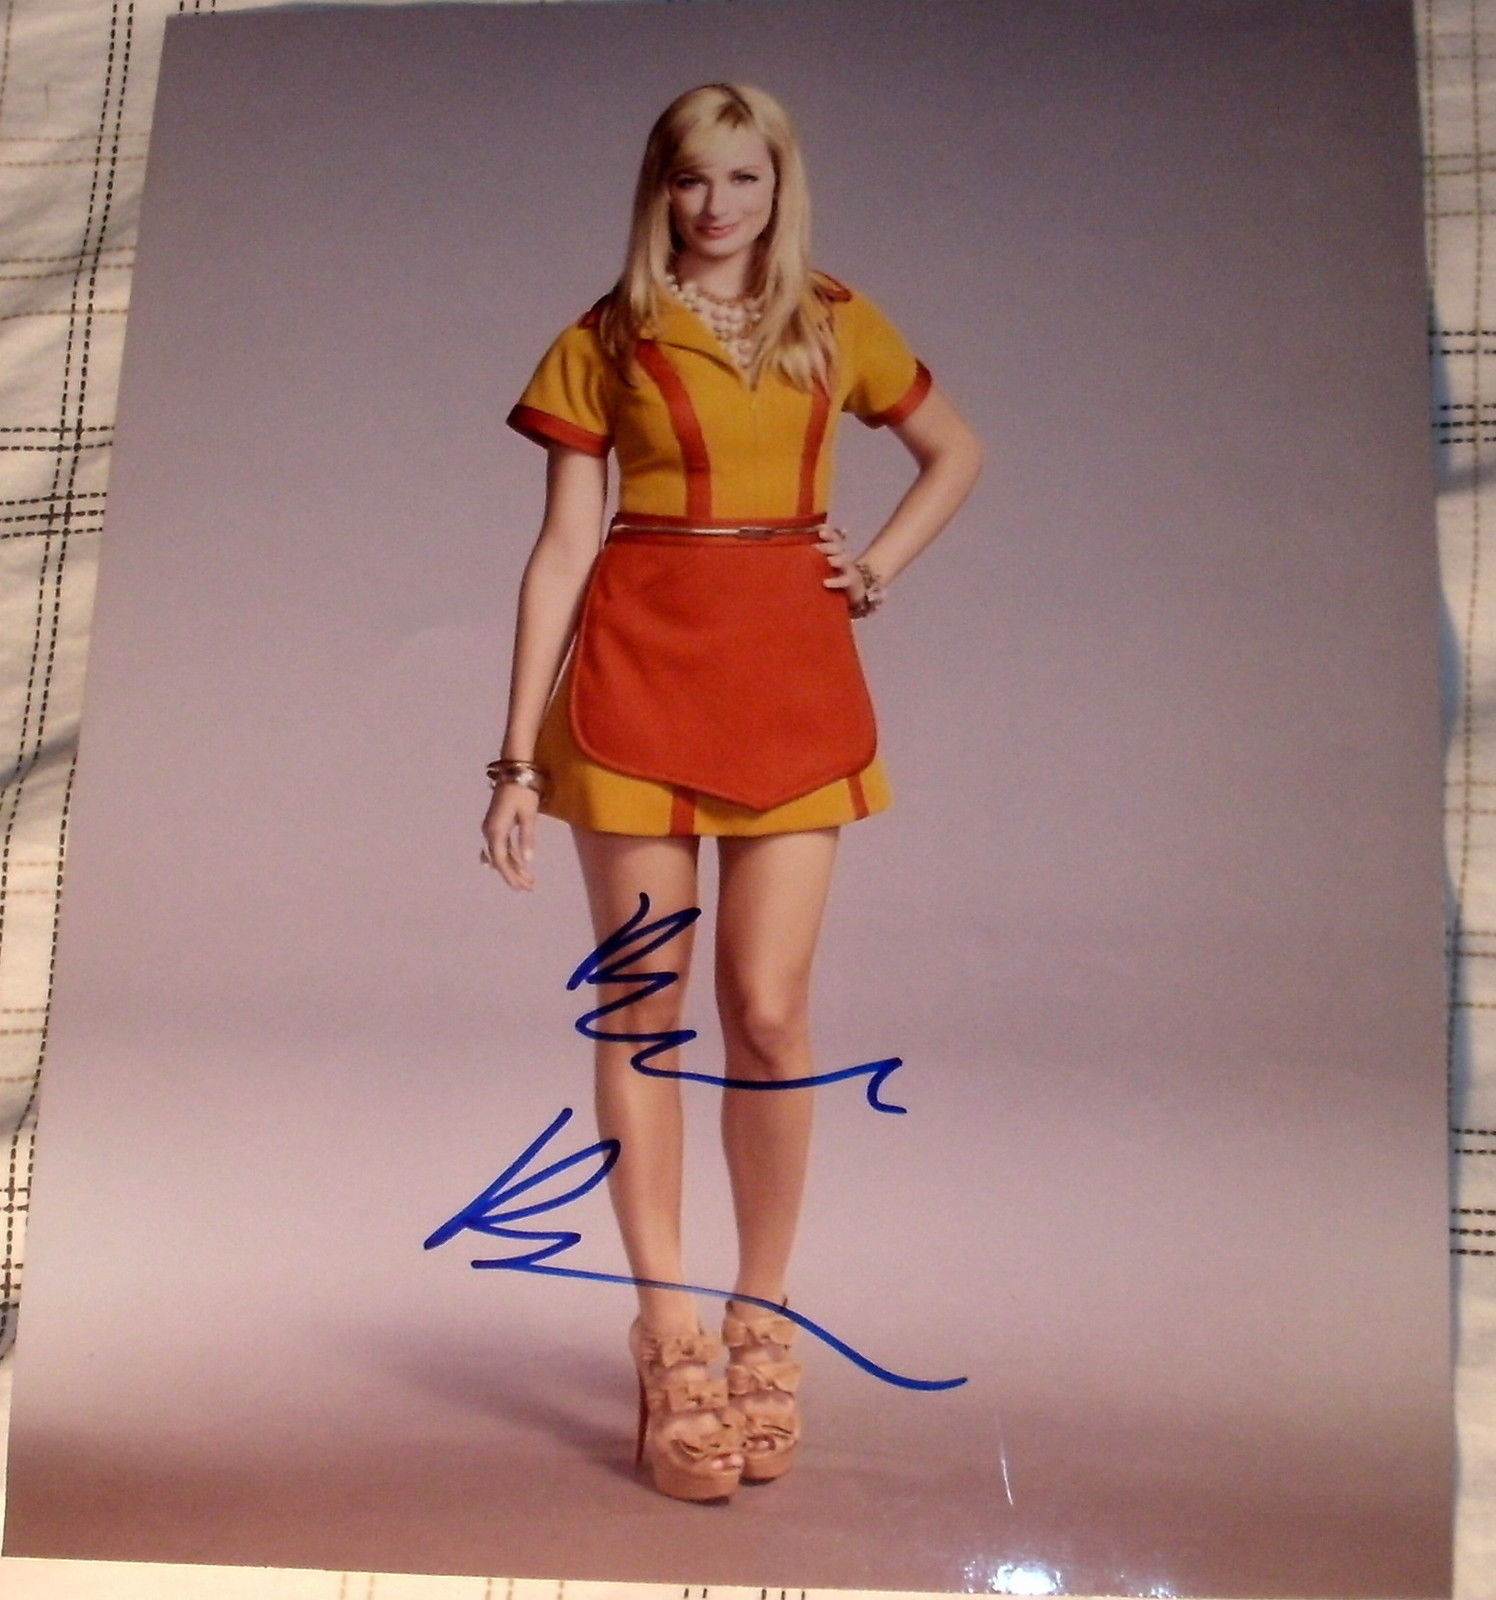 Beth Behrs Signed 2017 Total Me-Tox Hardcover Book 1st Ed 2 Broke Girls.